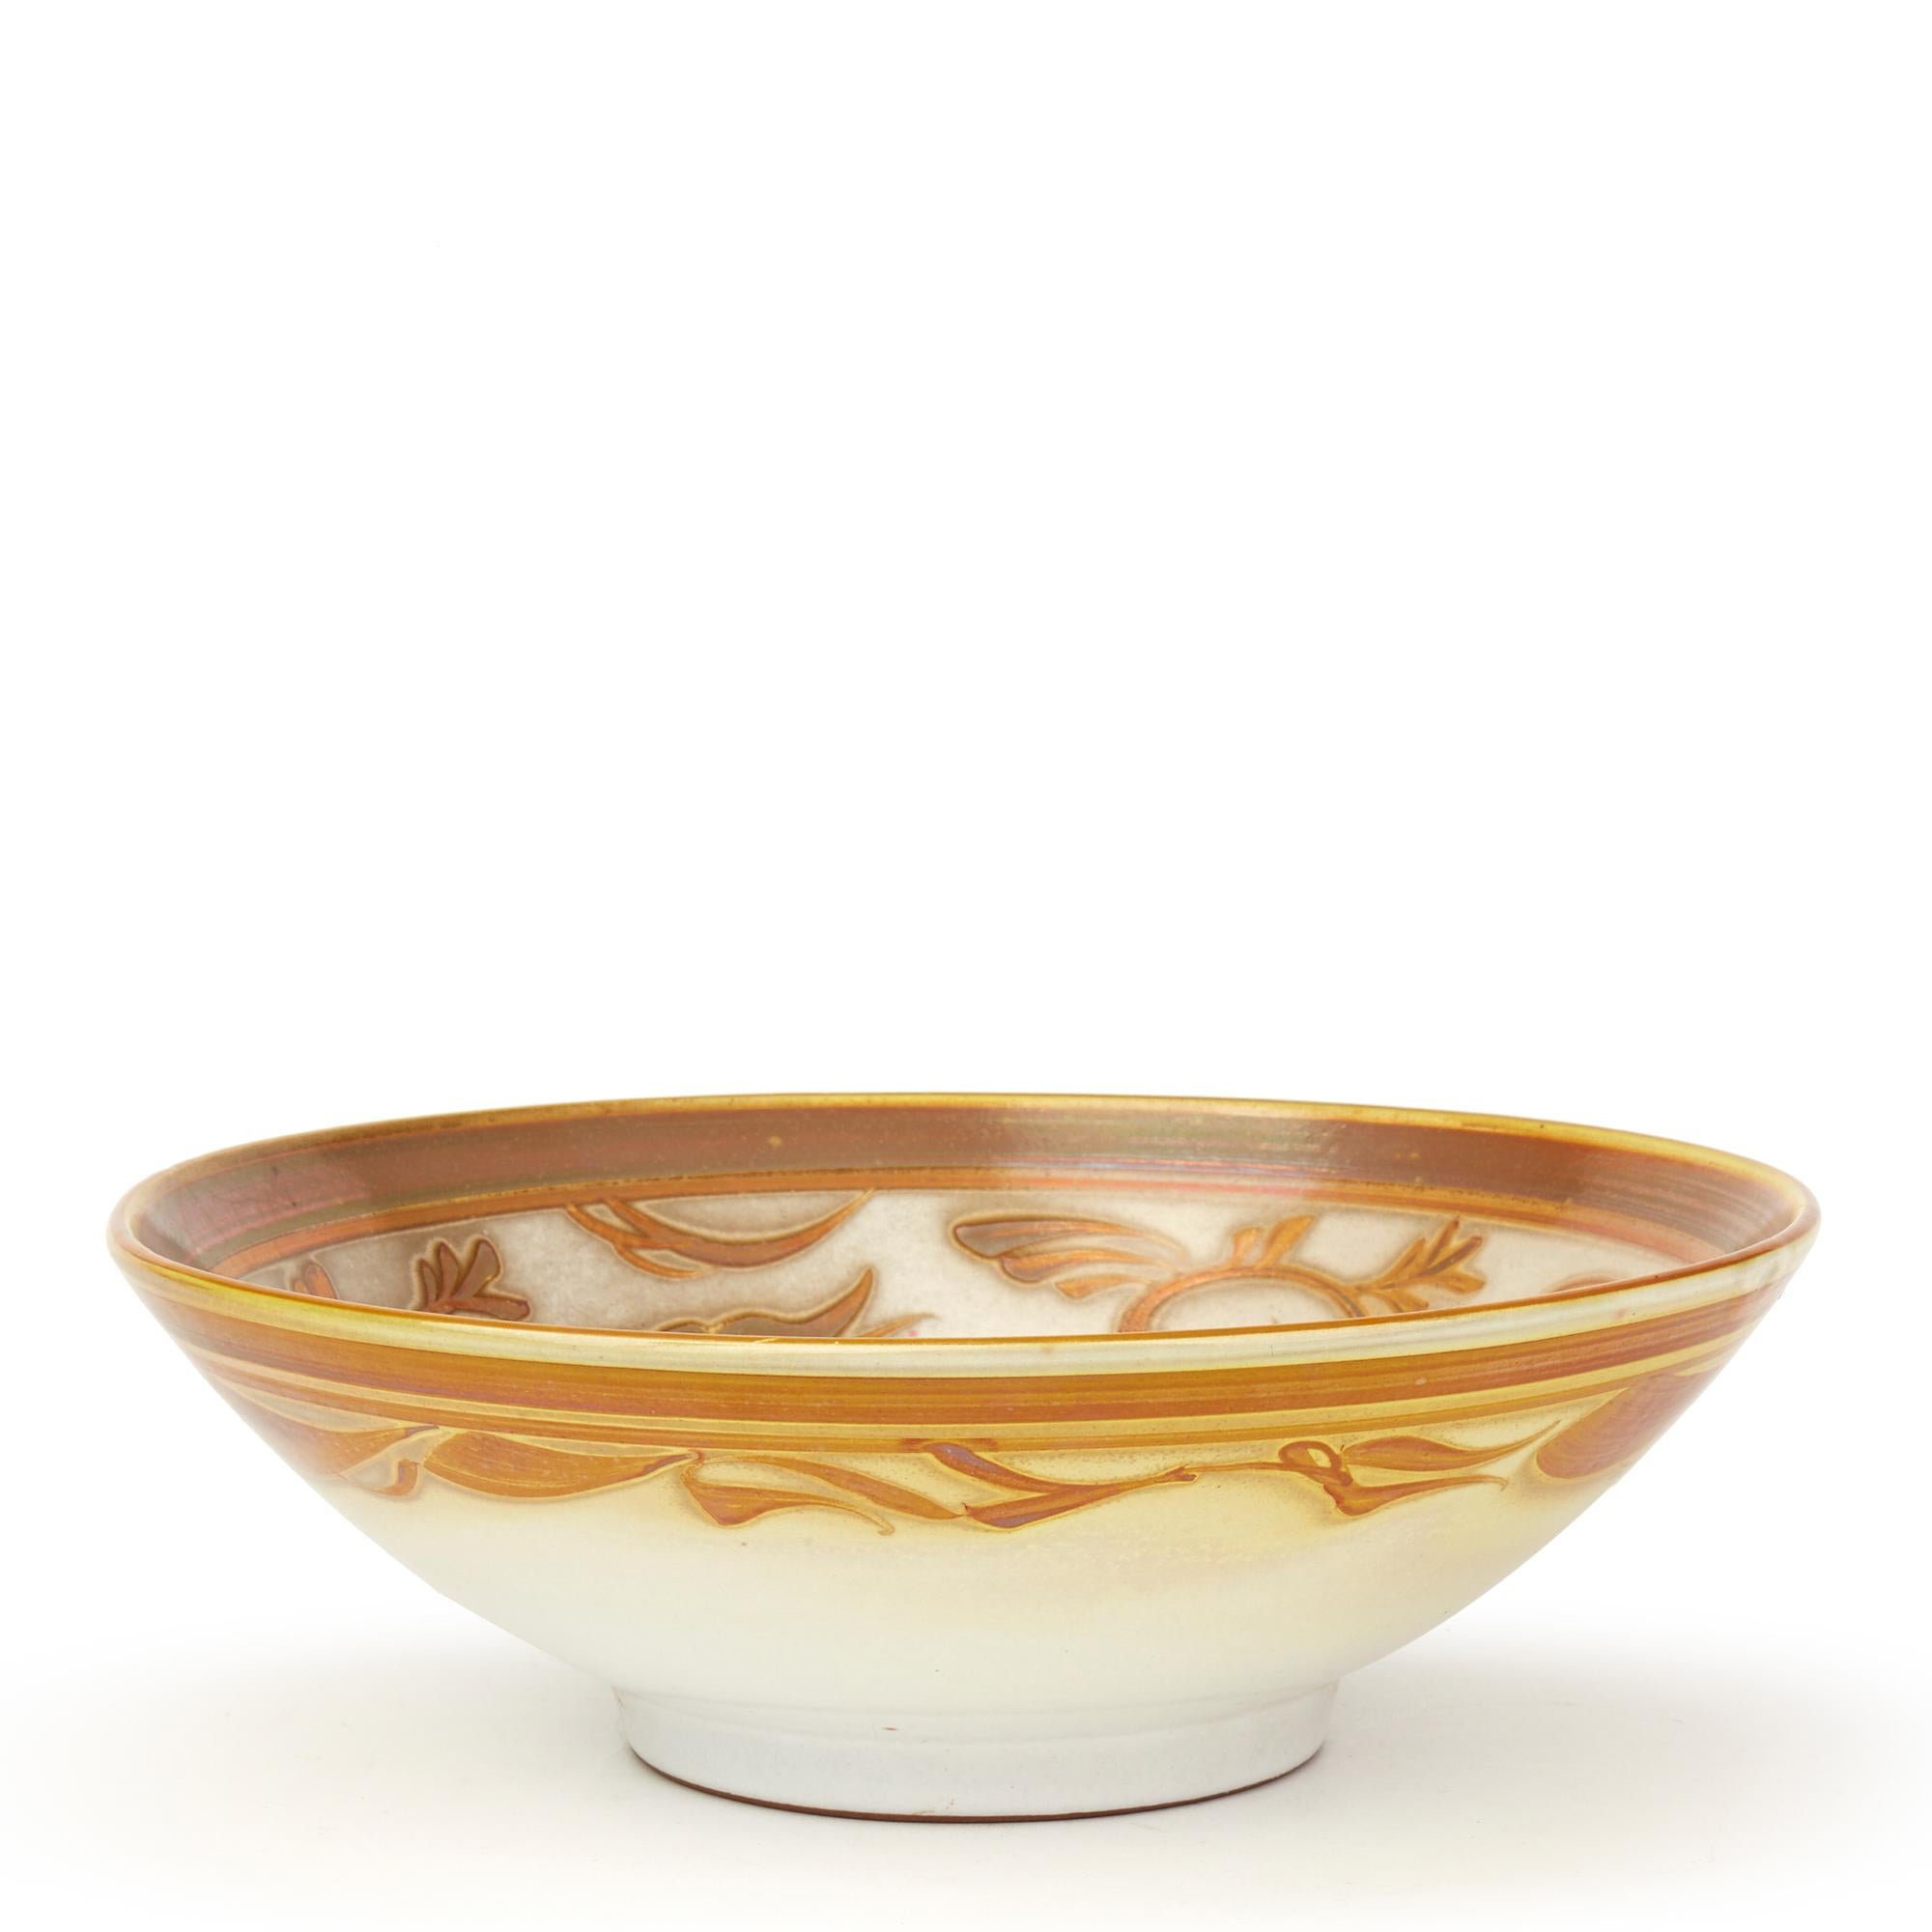 A stunning vintage Studio Pottery earthenware bowl decorated with gold and red lustre scrolling floral designs below a banded rim with a central fern stem to the centre and with similar patterns applied around the outside rim by Alan Caiger-Smith